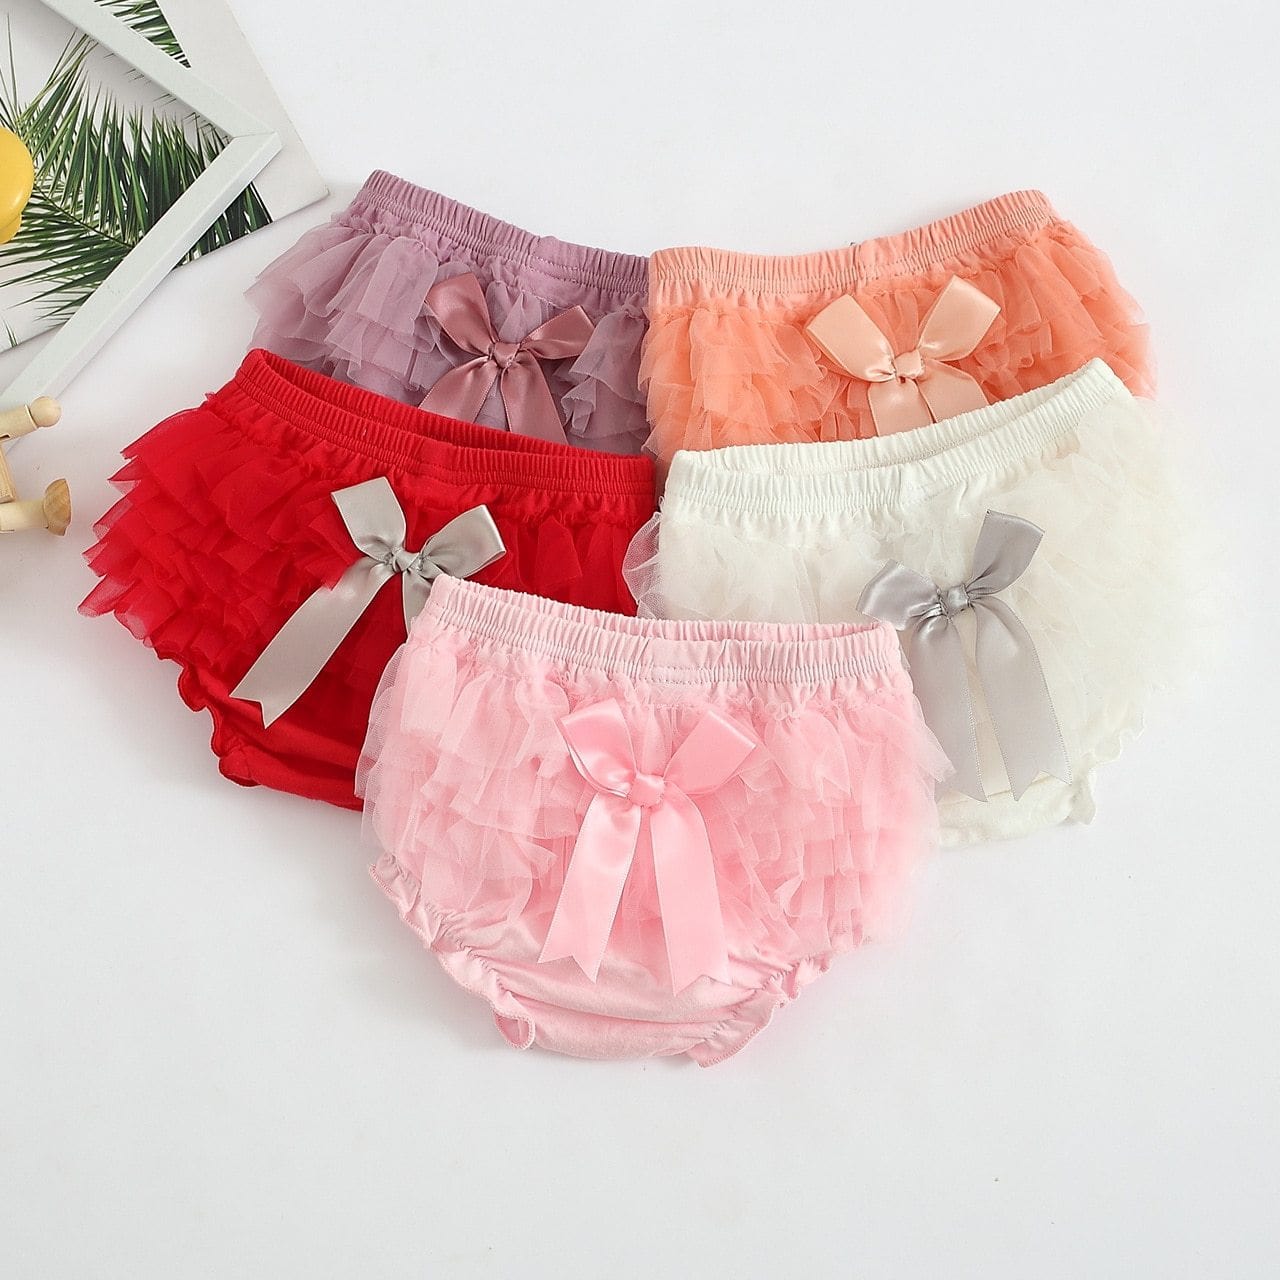 Baby Girls Sparkle Lace Frilly Panties